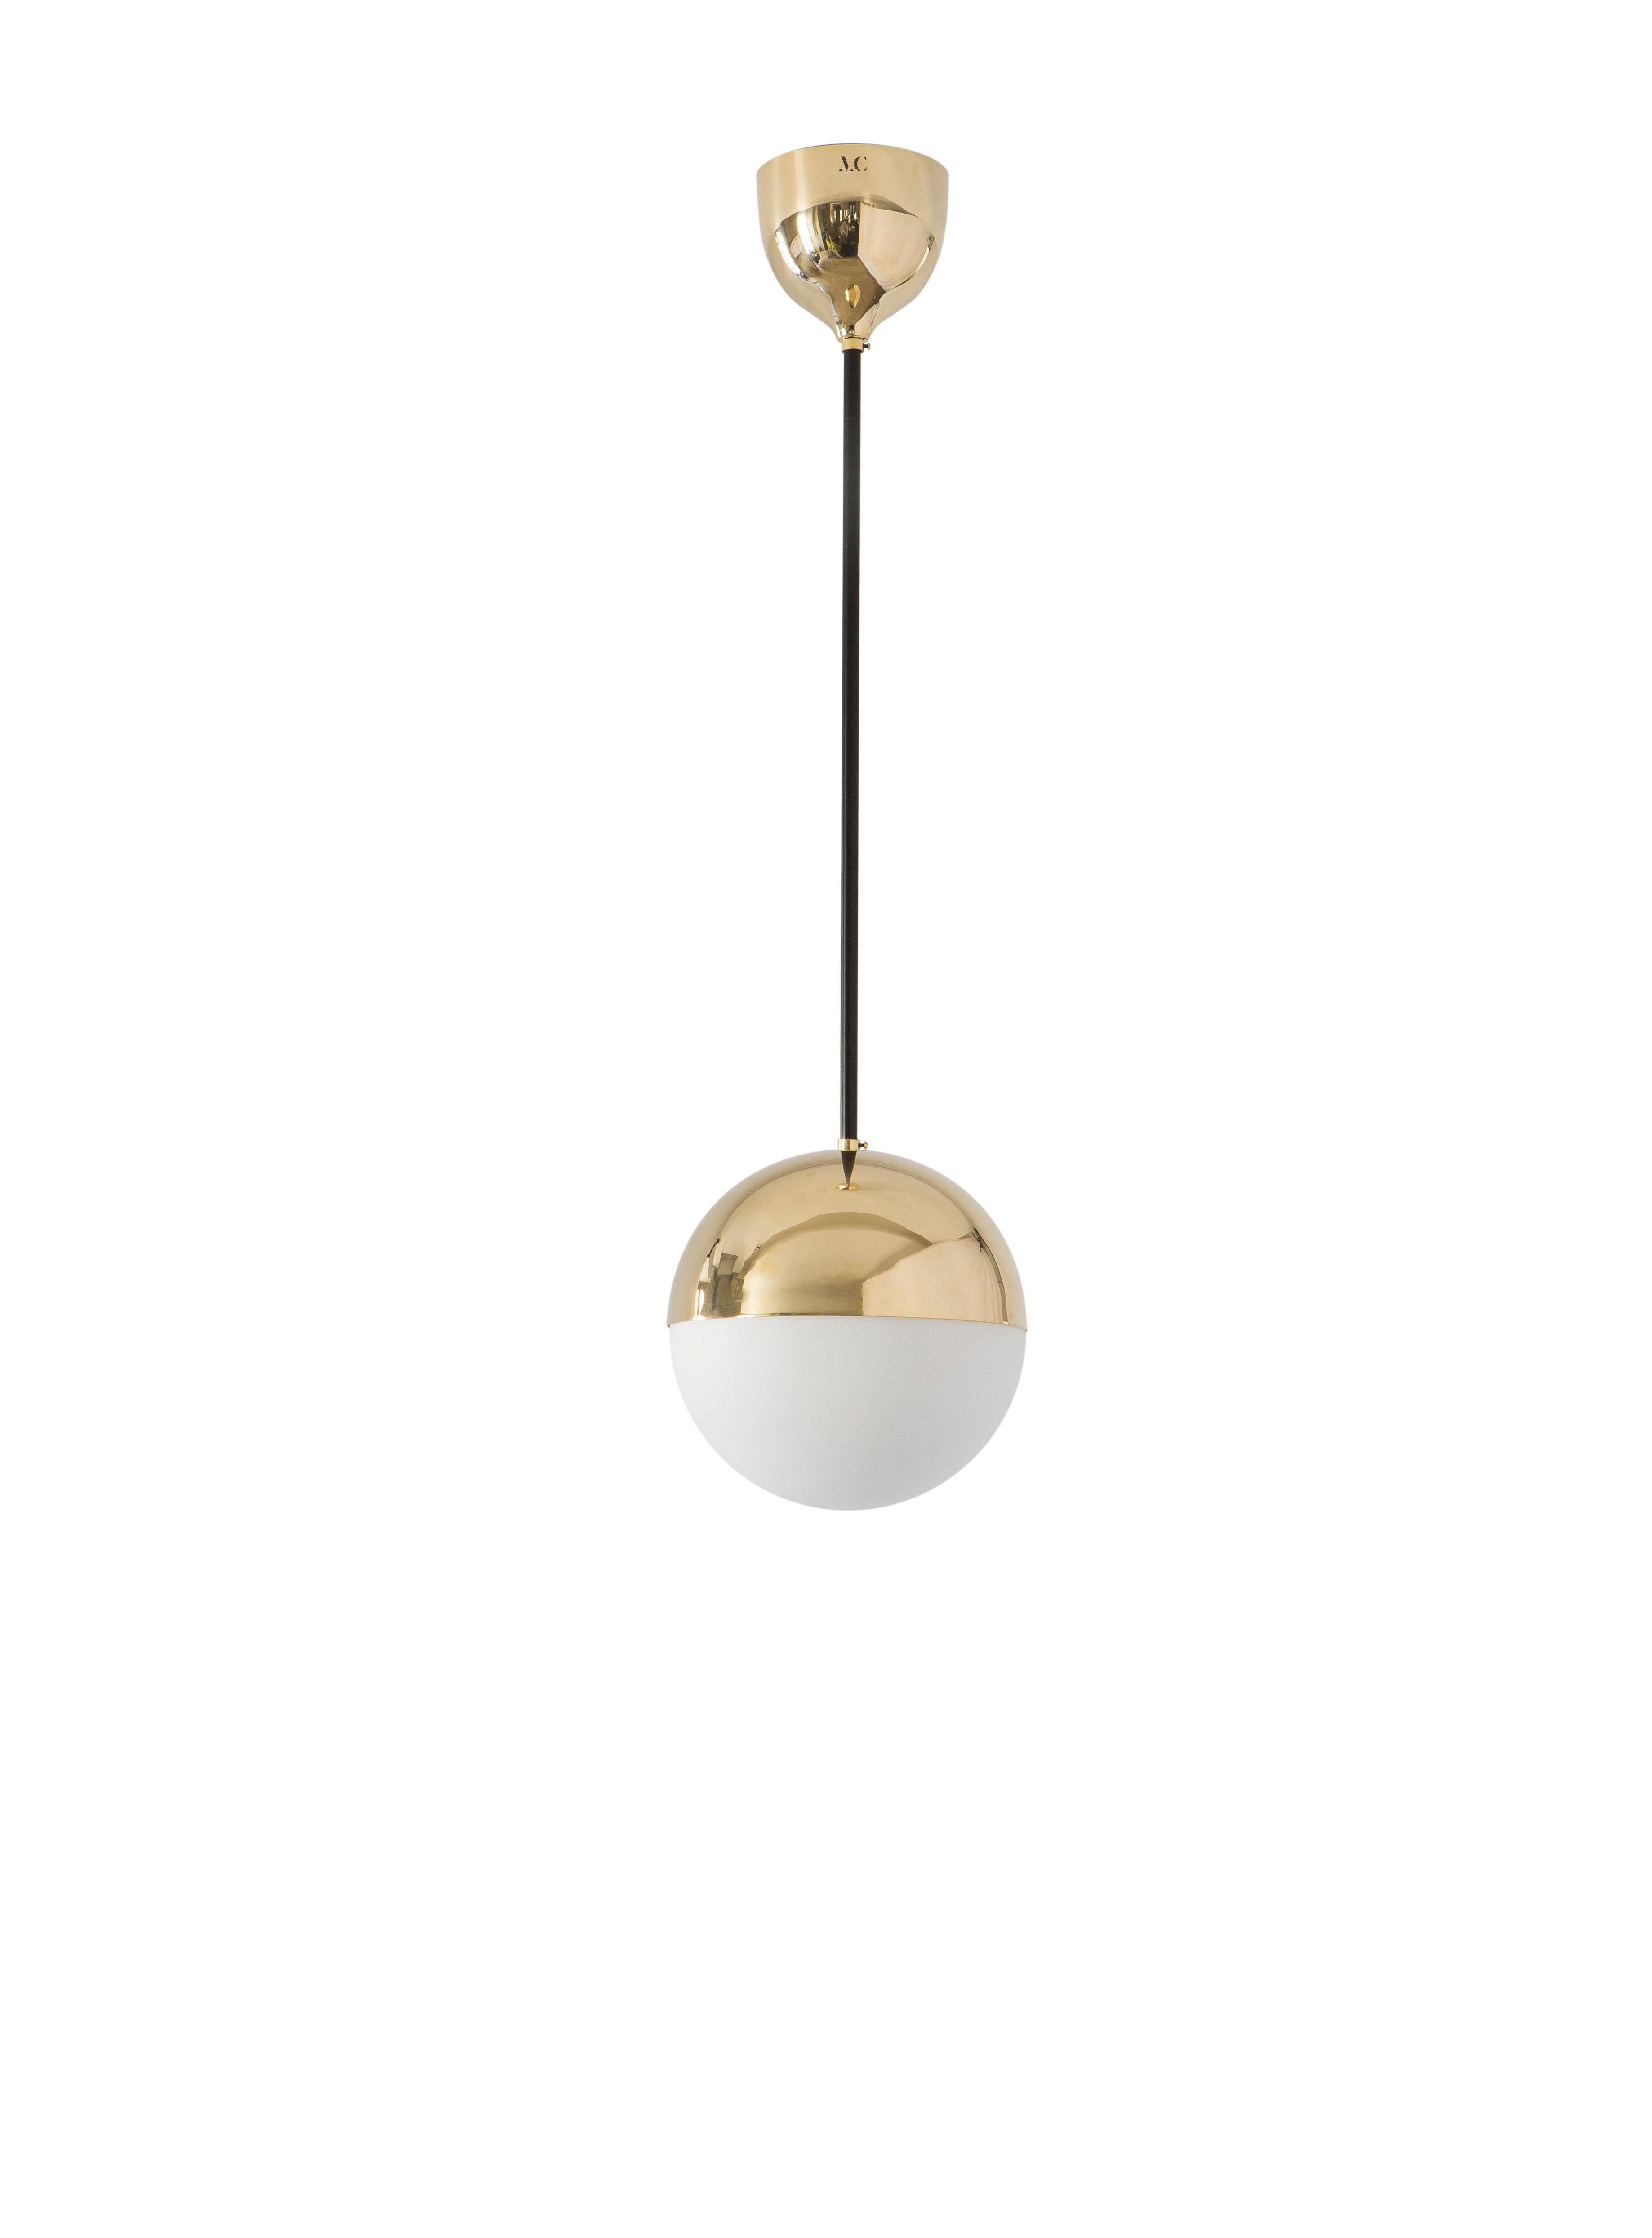 Pendant 01 by Magic Circus Editions
Dimensions: D 25 x W 25 x H 130 cm, also available in H 110, 150, 175, 190 cm
Materials: Brass, mouth blown glass

All our lamps can be wired according to each country. If sold to the USA it will be wired for